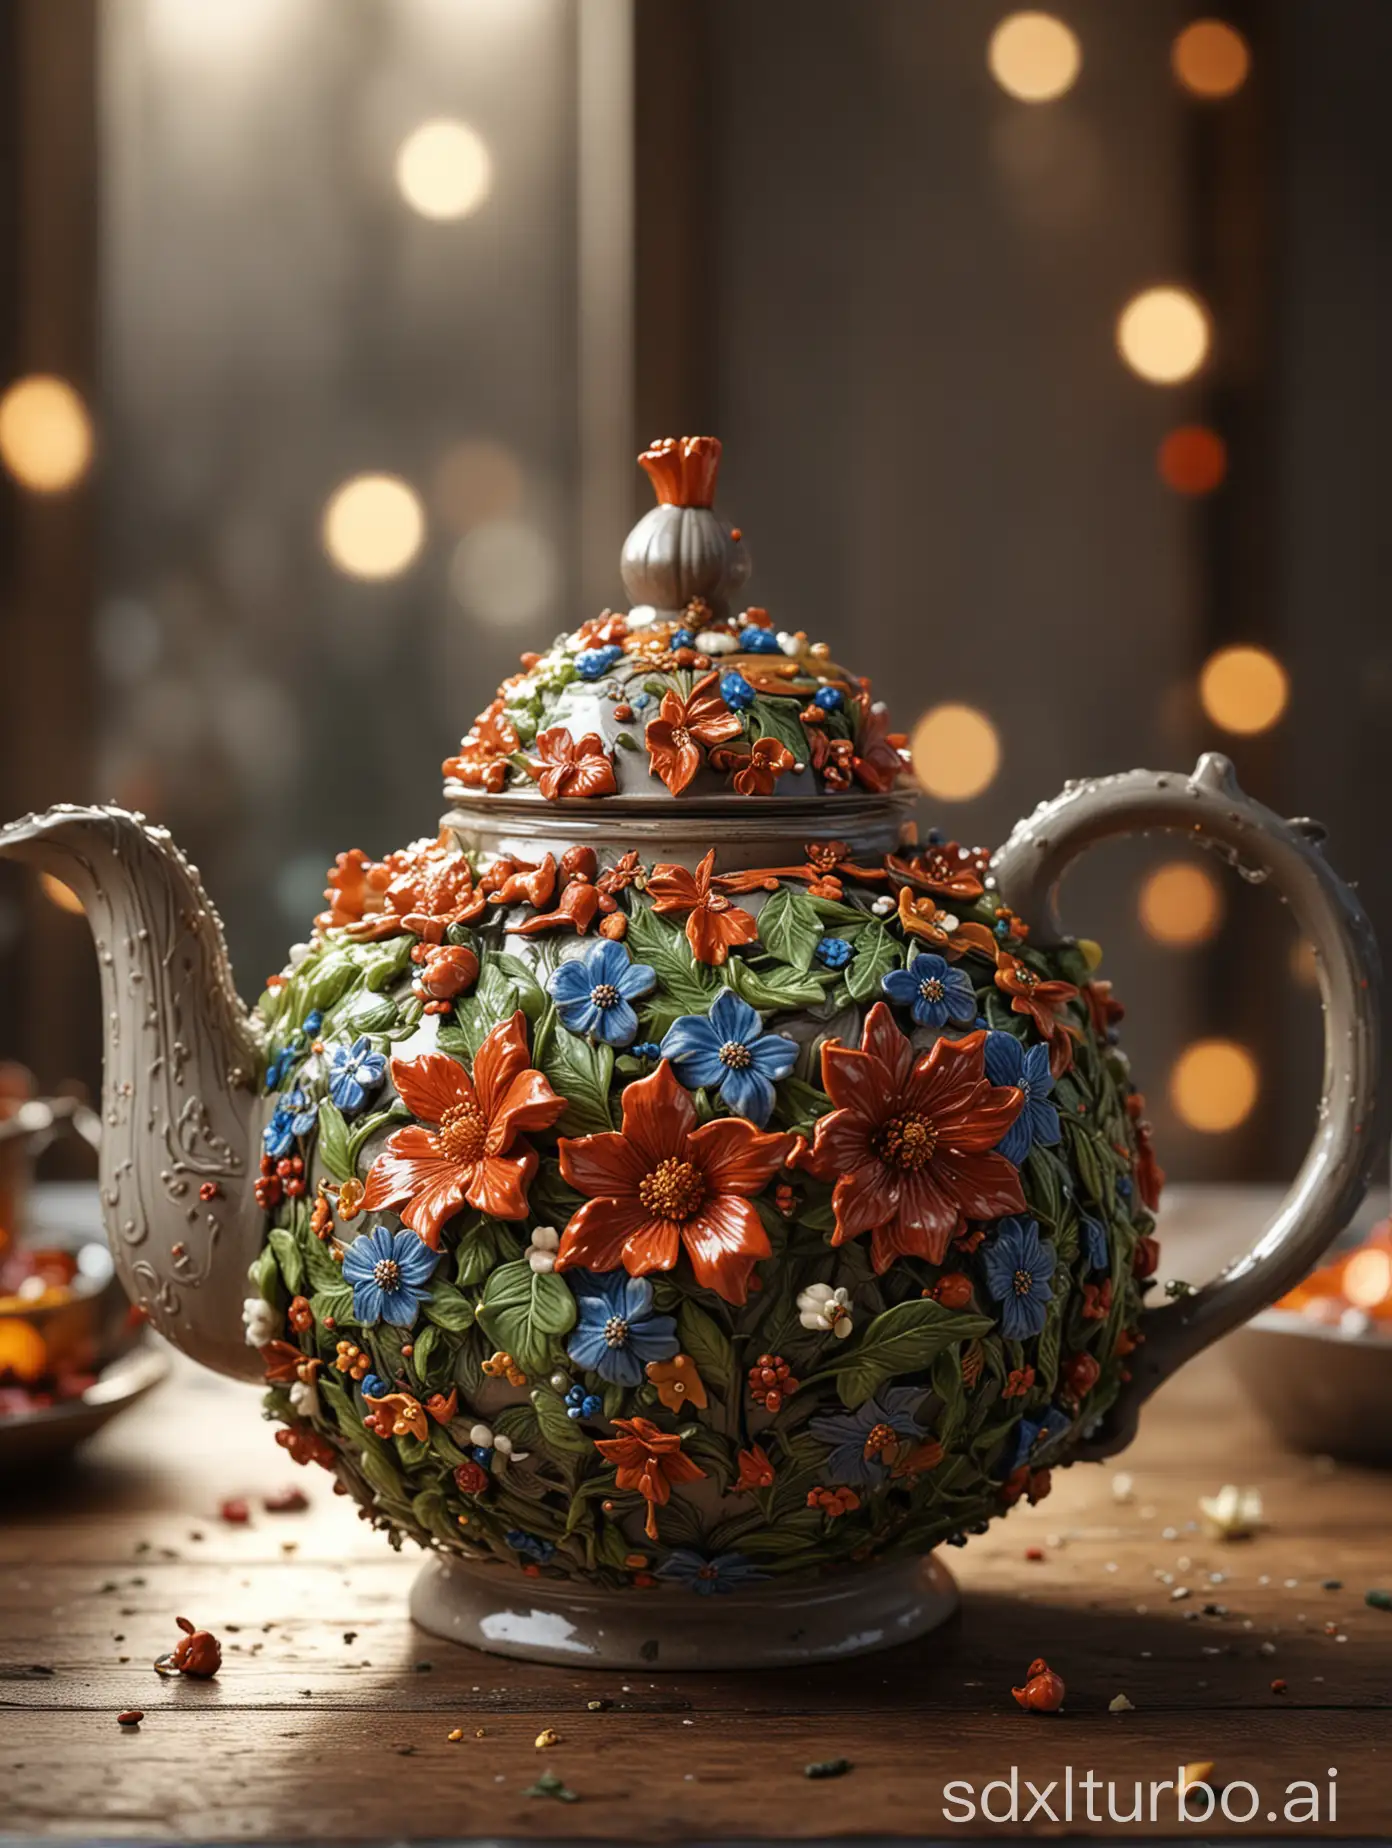 Exquisite-Ceramic-Teapot-with-3D-Floral-Design-High-Resolution-Photography